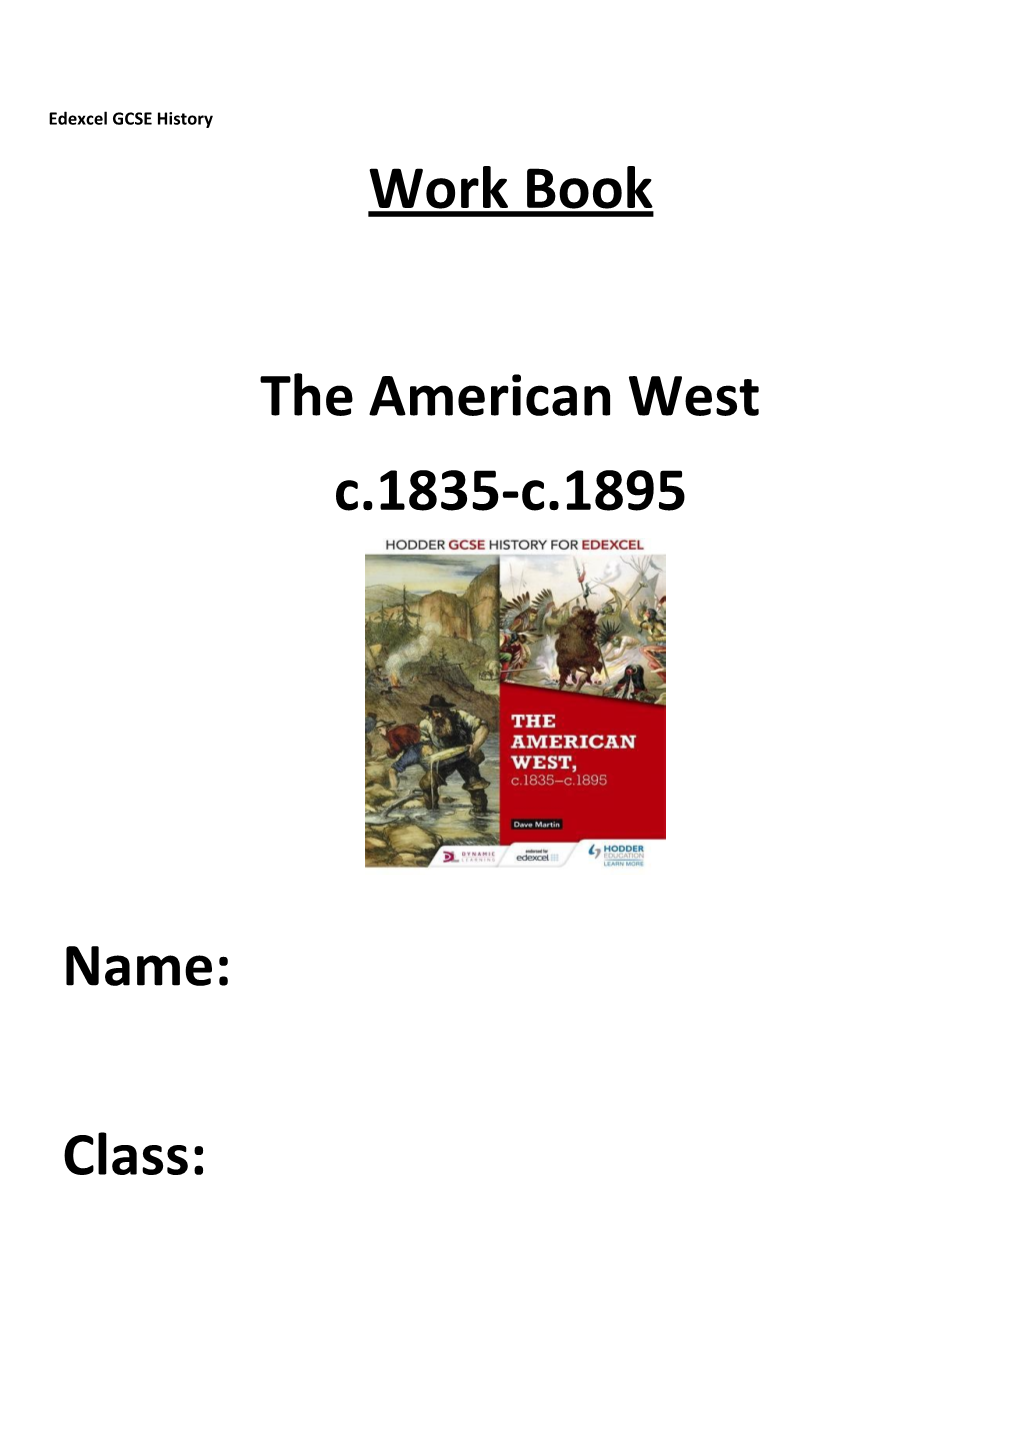 Work Book Name: Class: the American West C.1835-C.1895